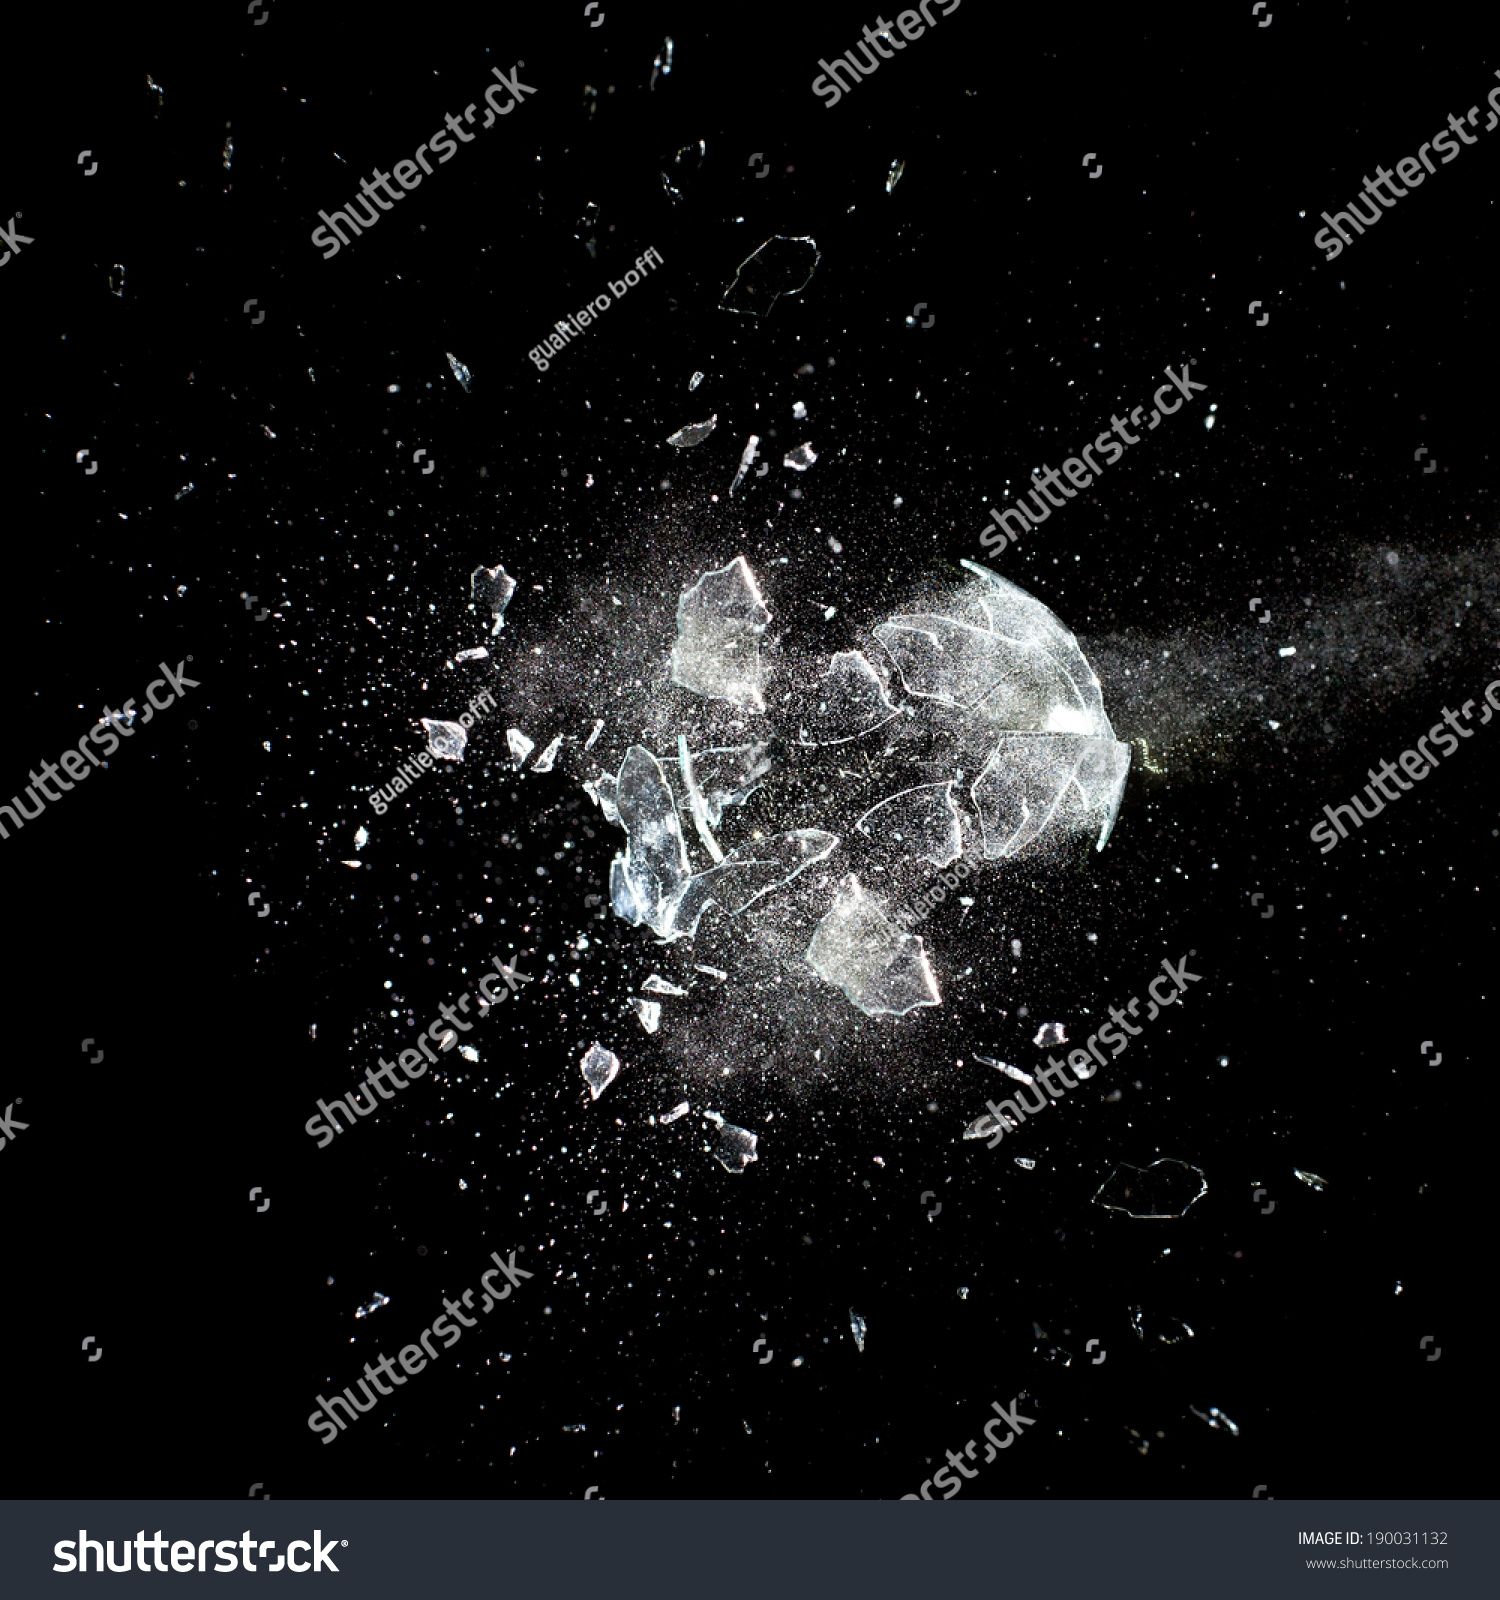 Close Image Glass Ball Explosion Stock Photo (Royalty Free ...